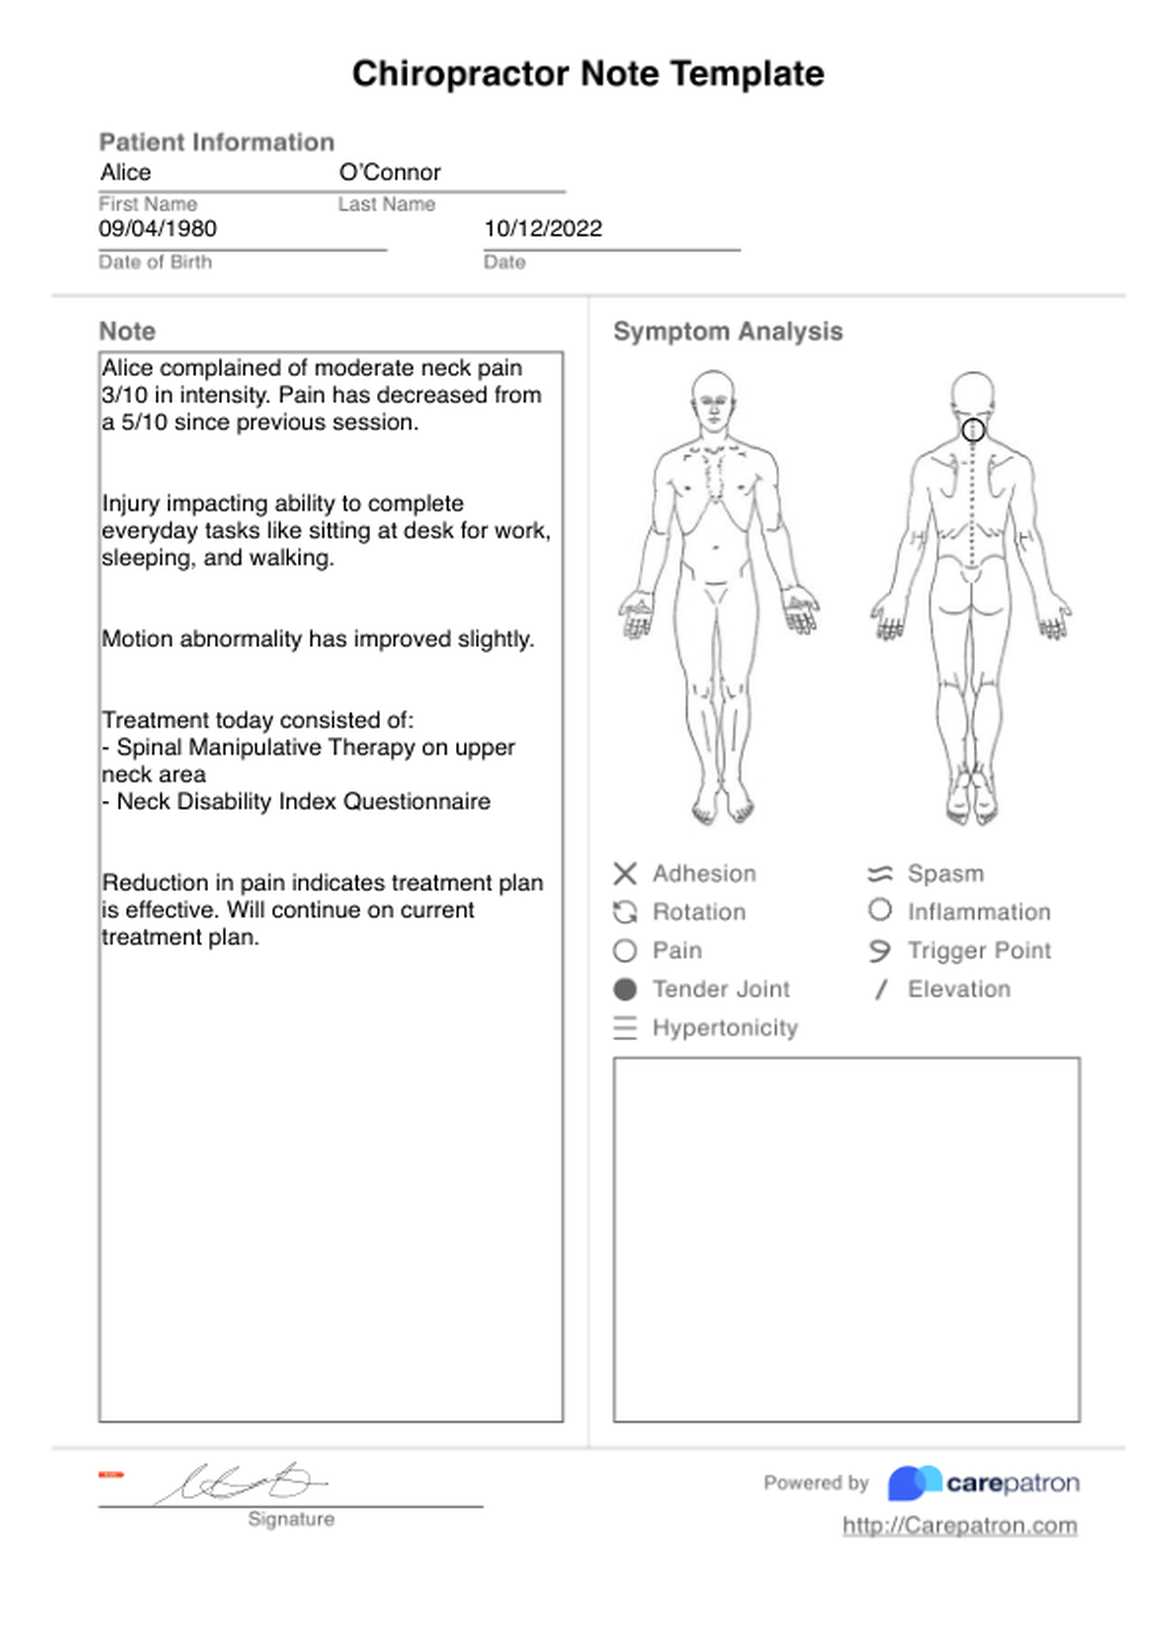 Chiropractor Note Template PDF Example